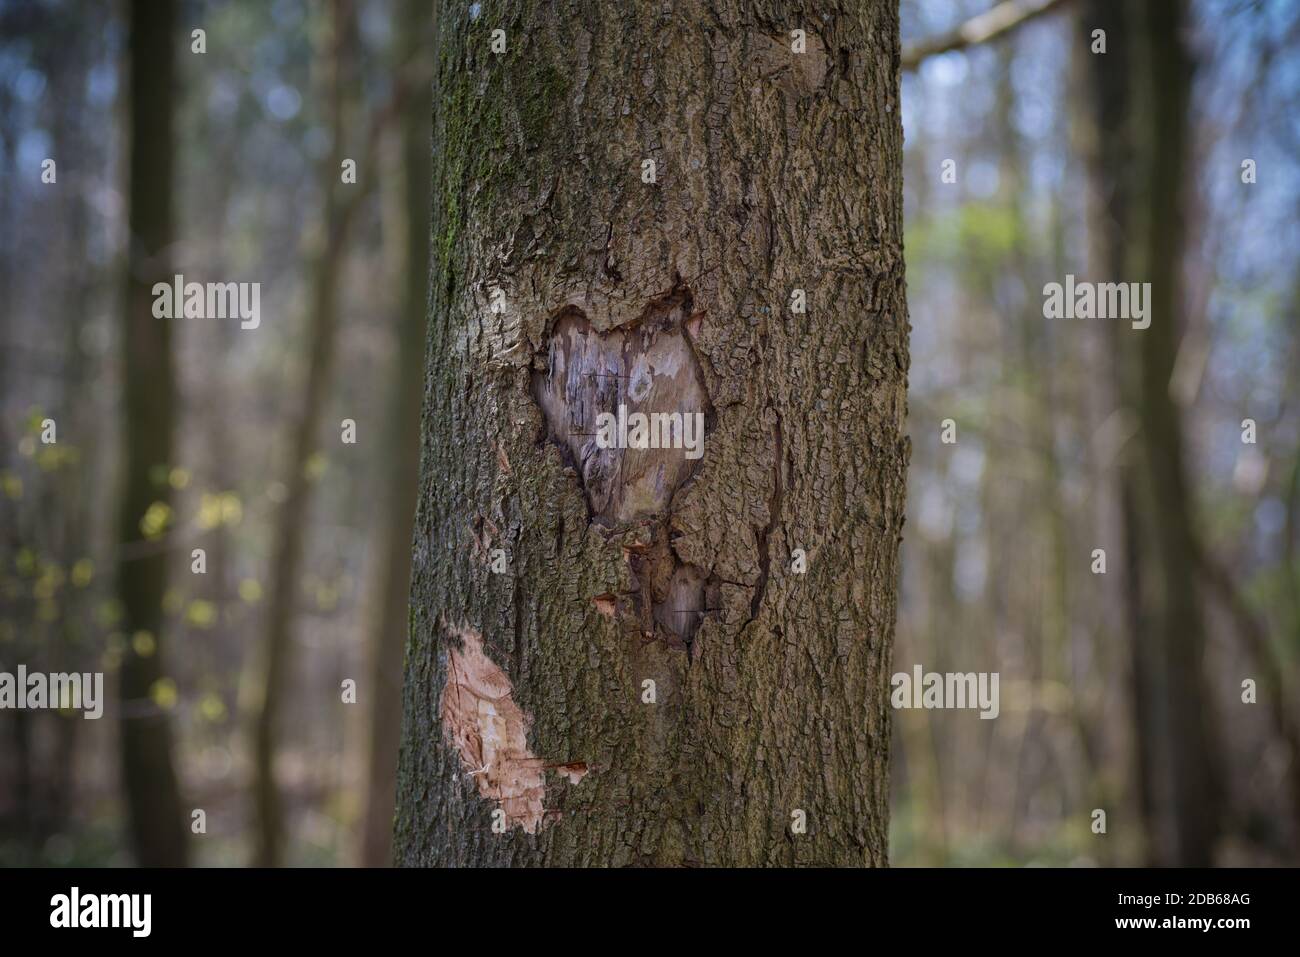 eart shape carved in a tree Stock Photo